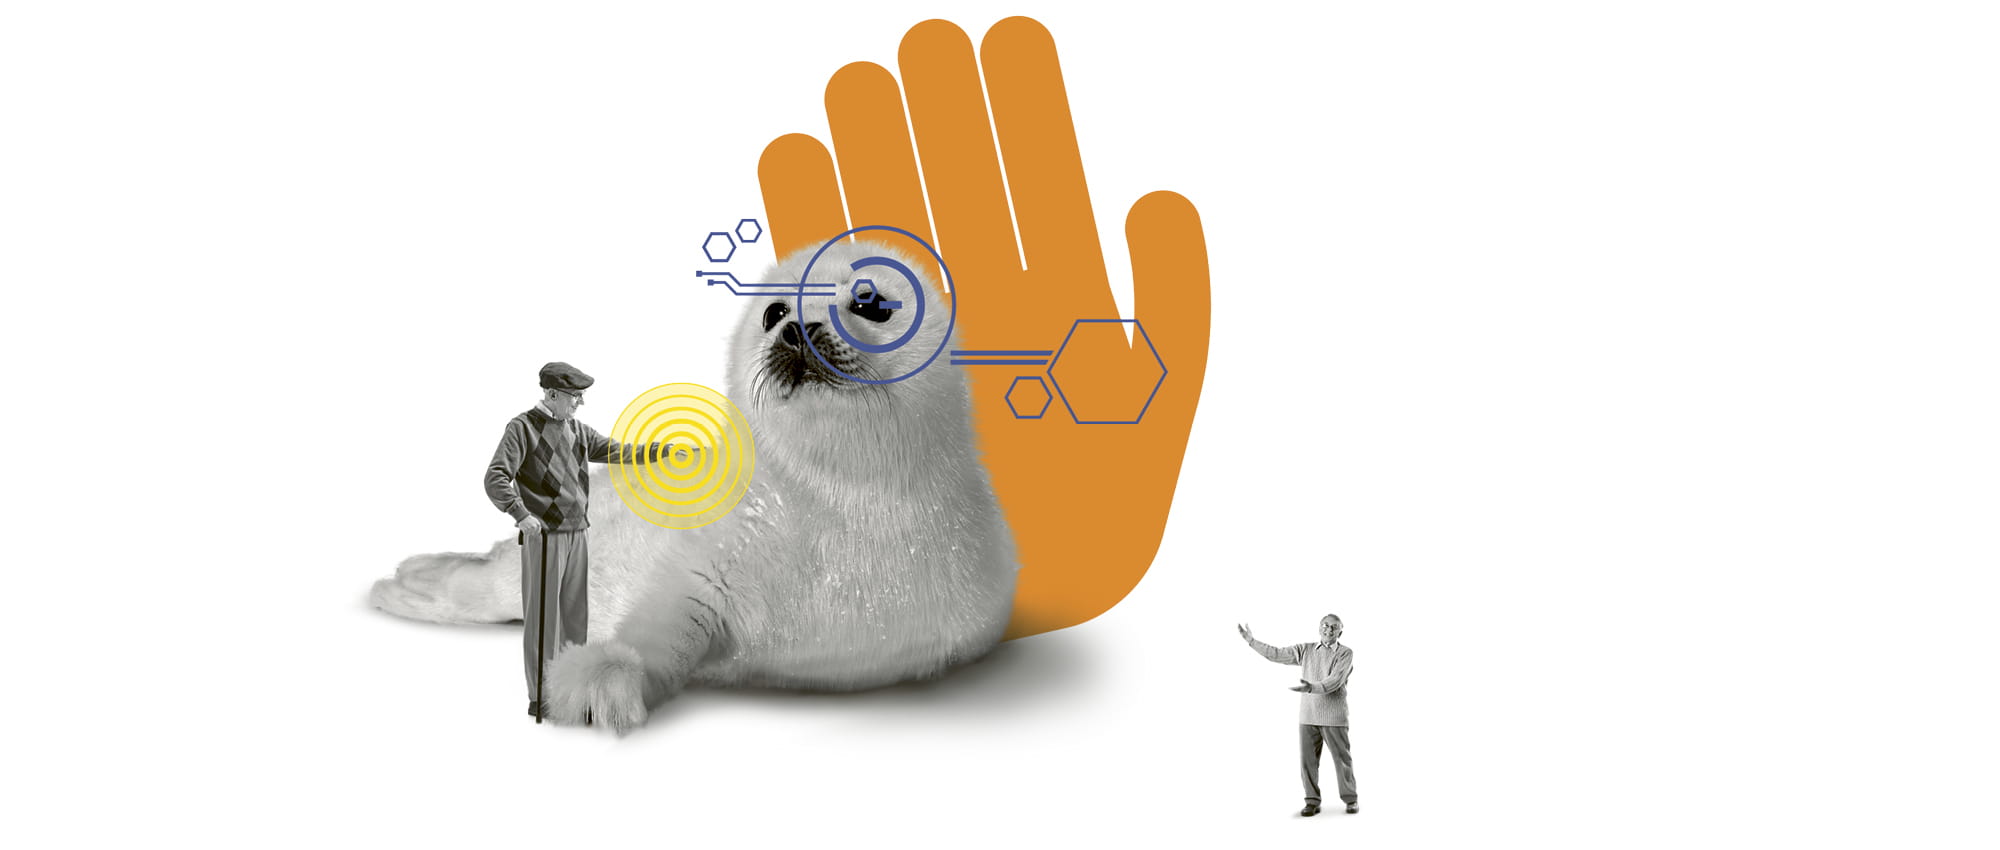 Illustration of a baby seal being stroked by an older man half its size with an illustrated orange hand in the background. 